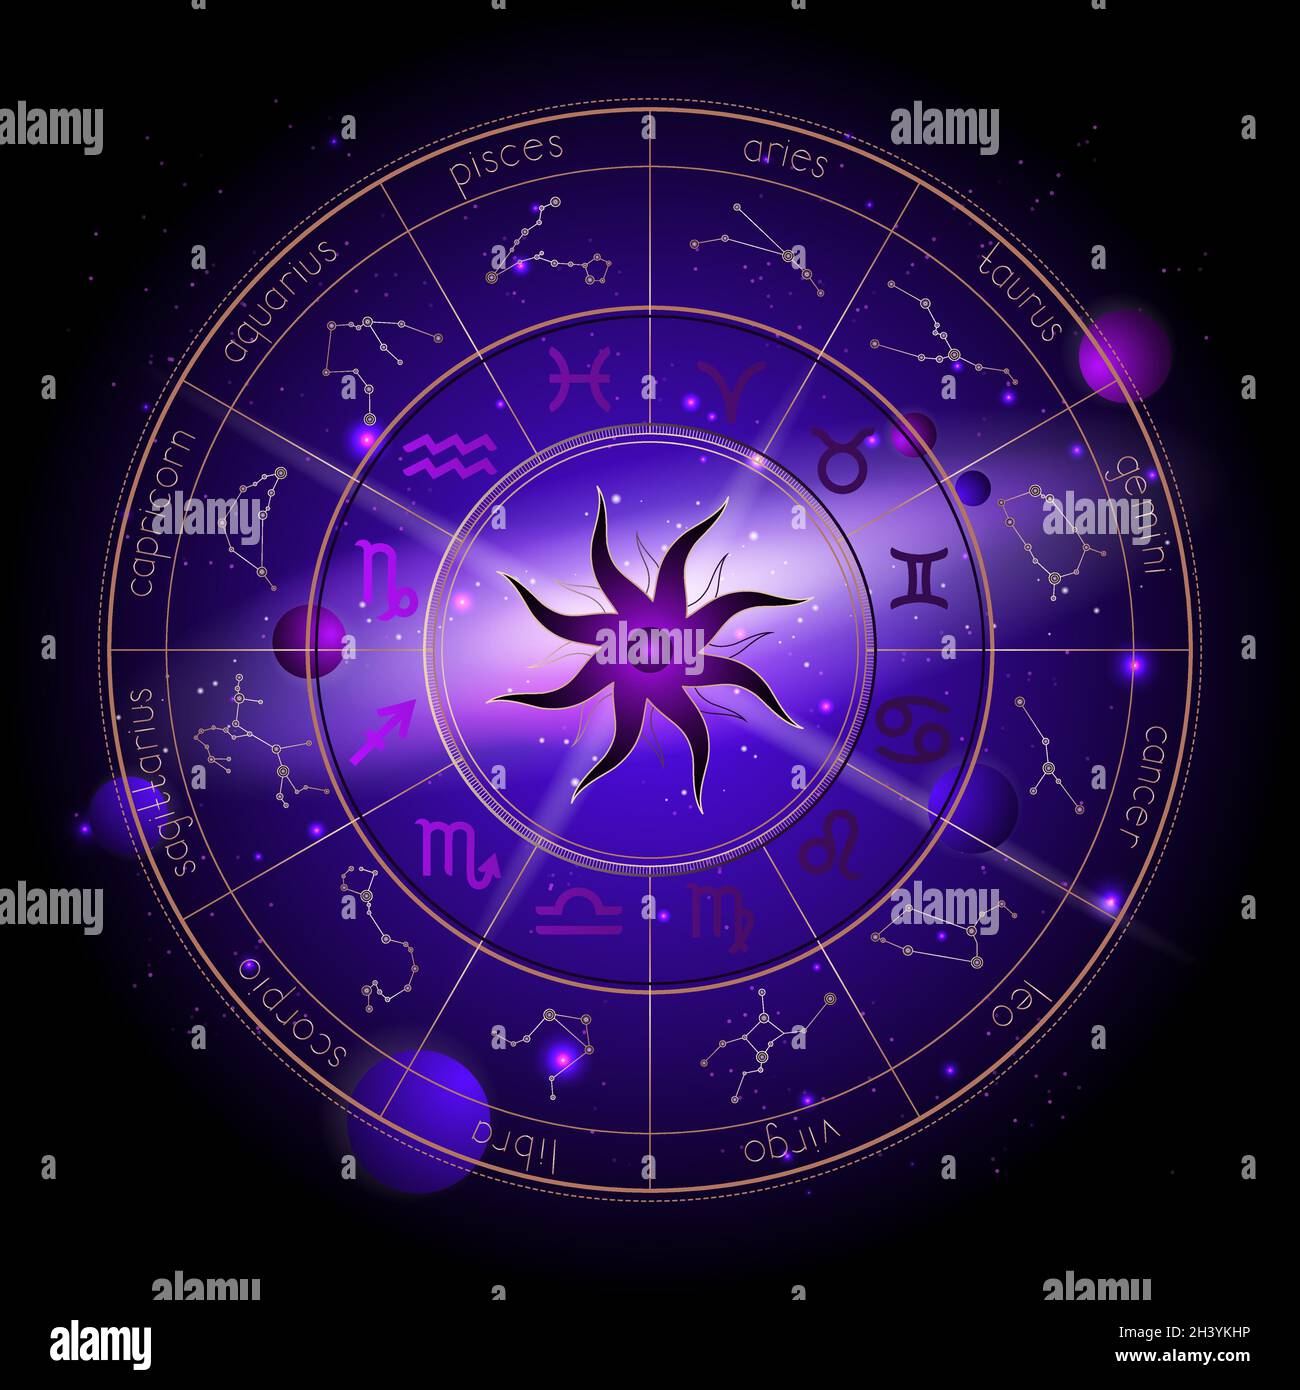 Vector illustration of Horoscope circle, Zodiac signs and astrology constellations against the space background with planets, stars and geometry patte Stock Vector